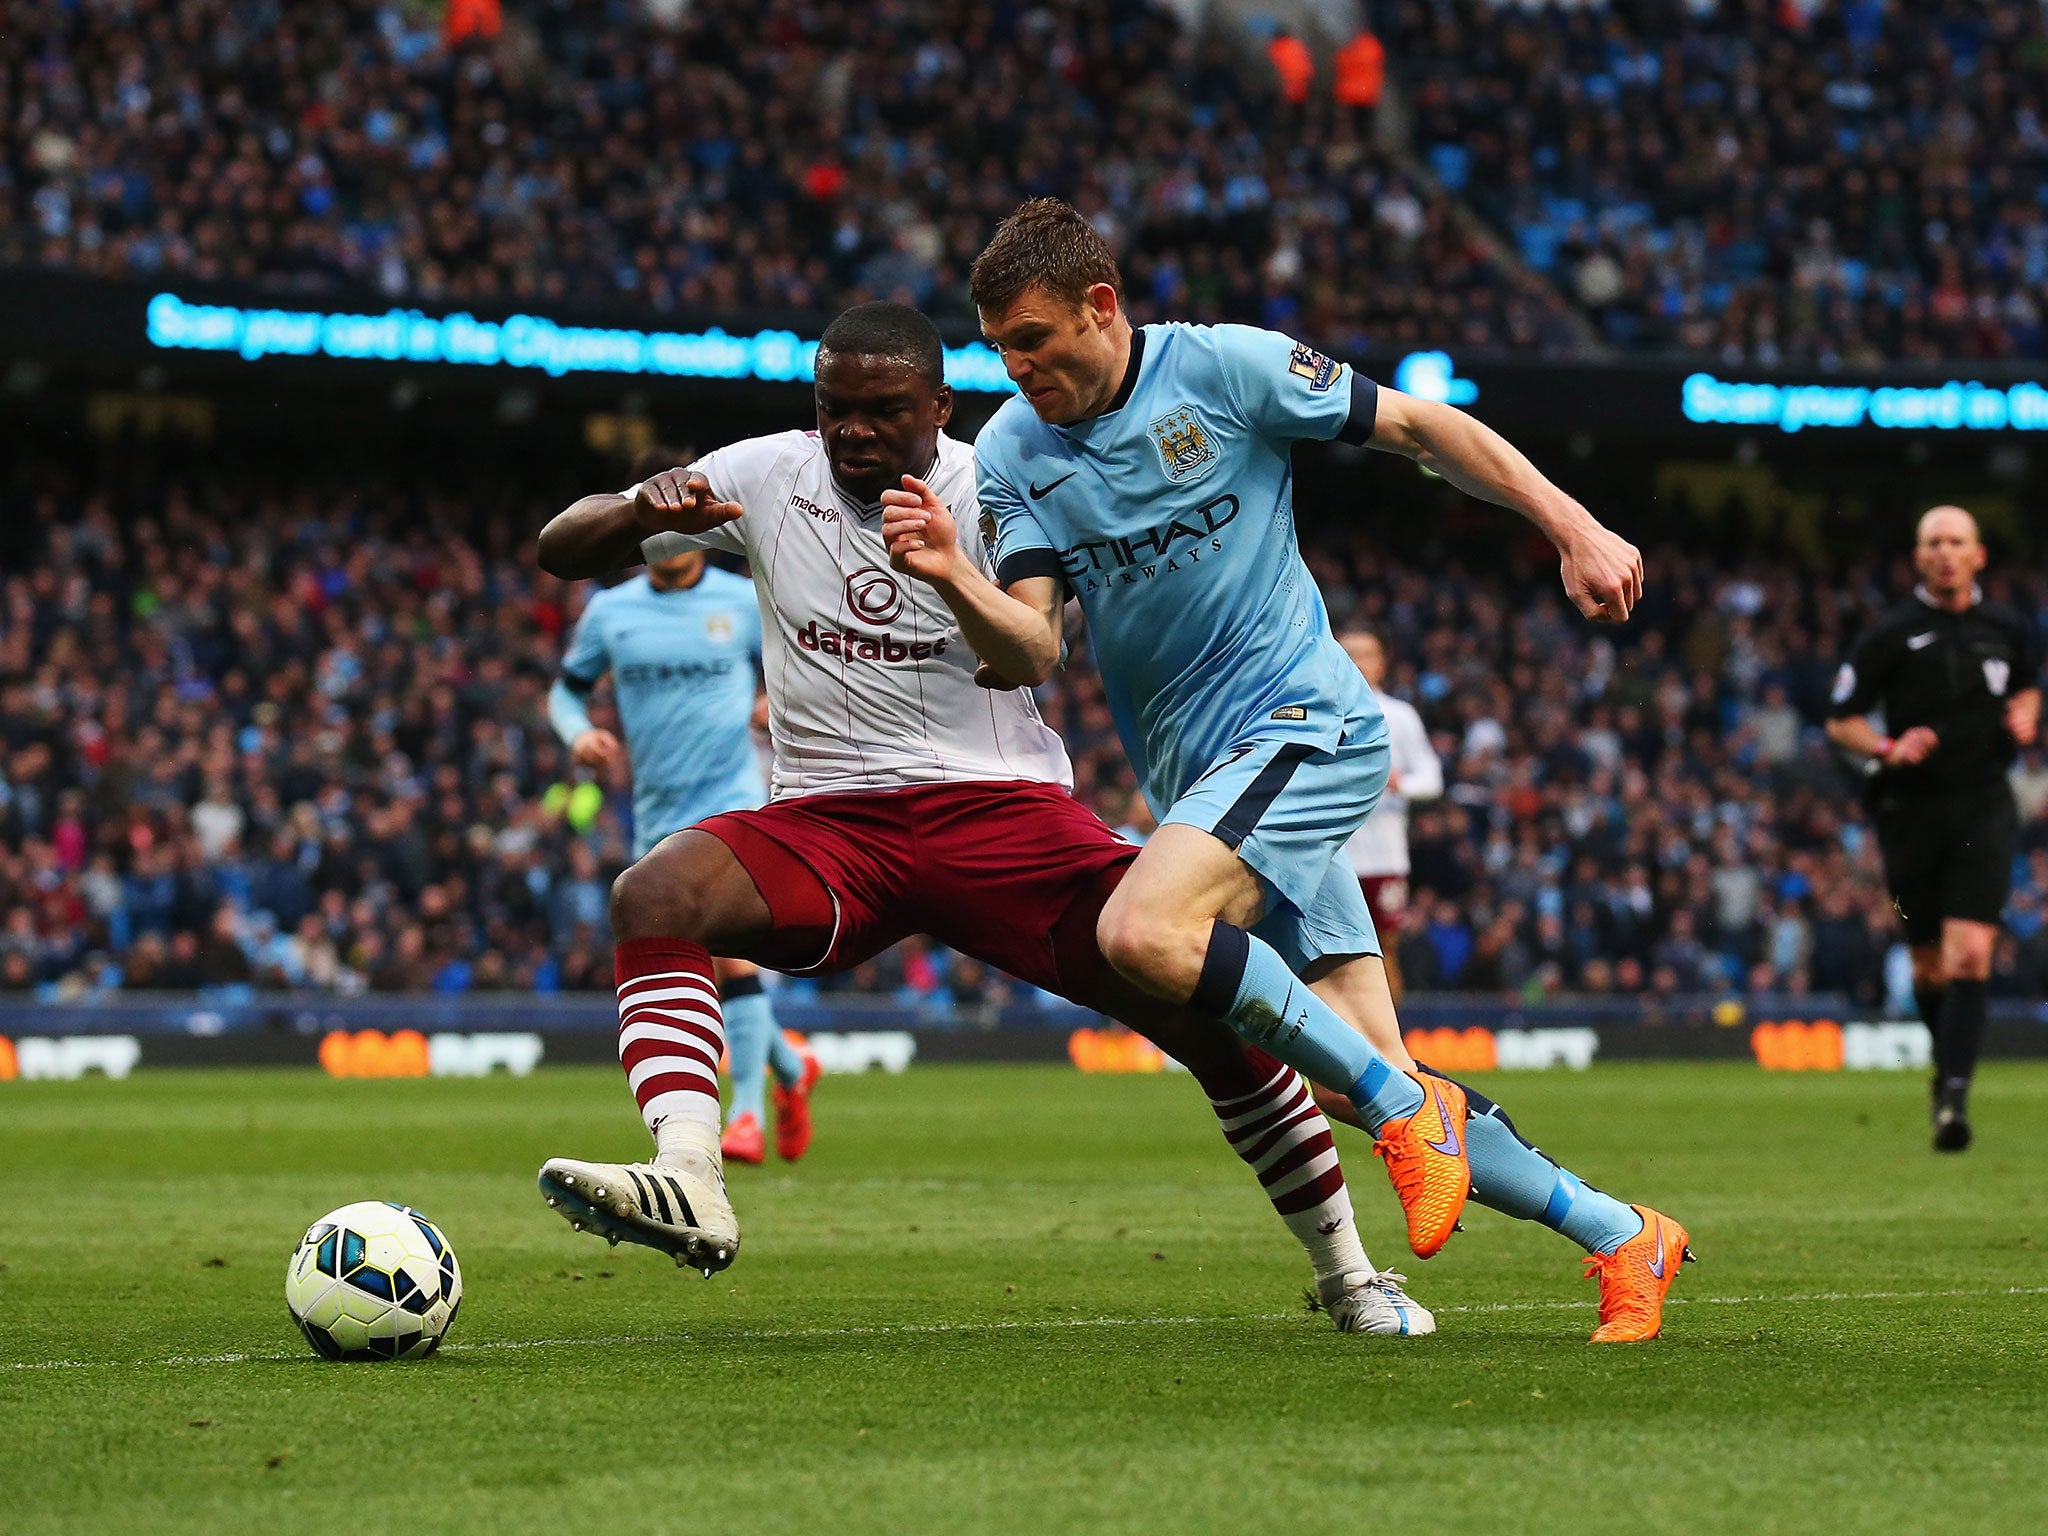 James Milner is likely to leave Manchester City